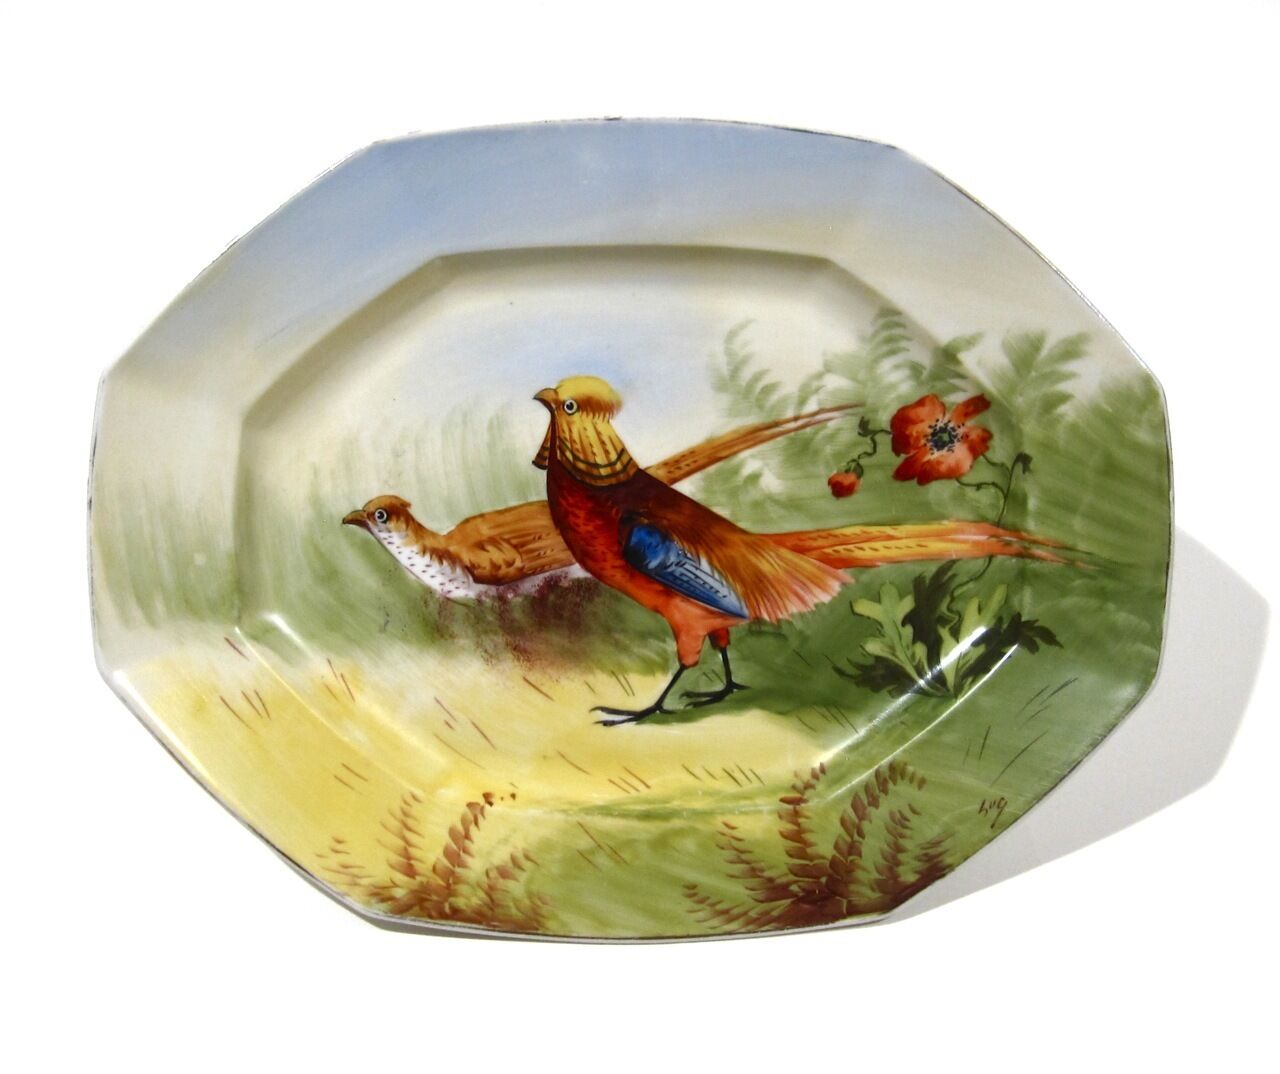 Antique French Limoges Hand Painted Platter, “Pheasants & Poppies”, Signed “Luc”